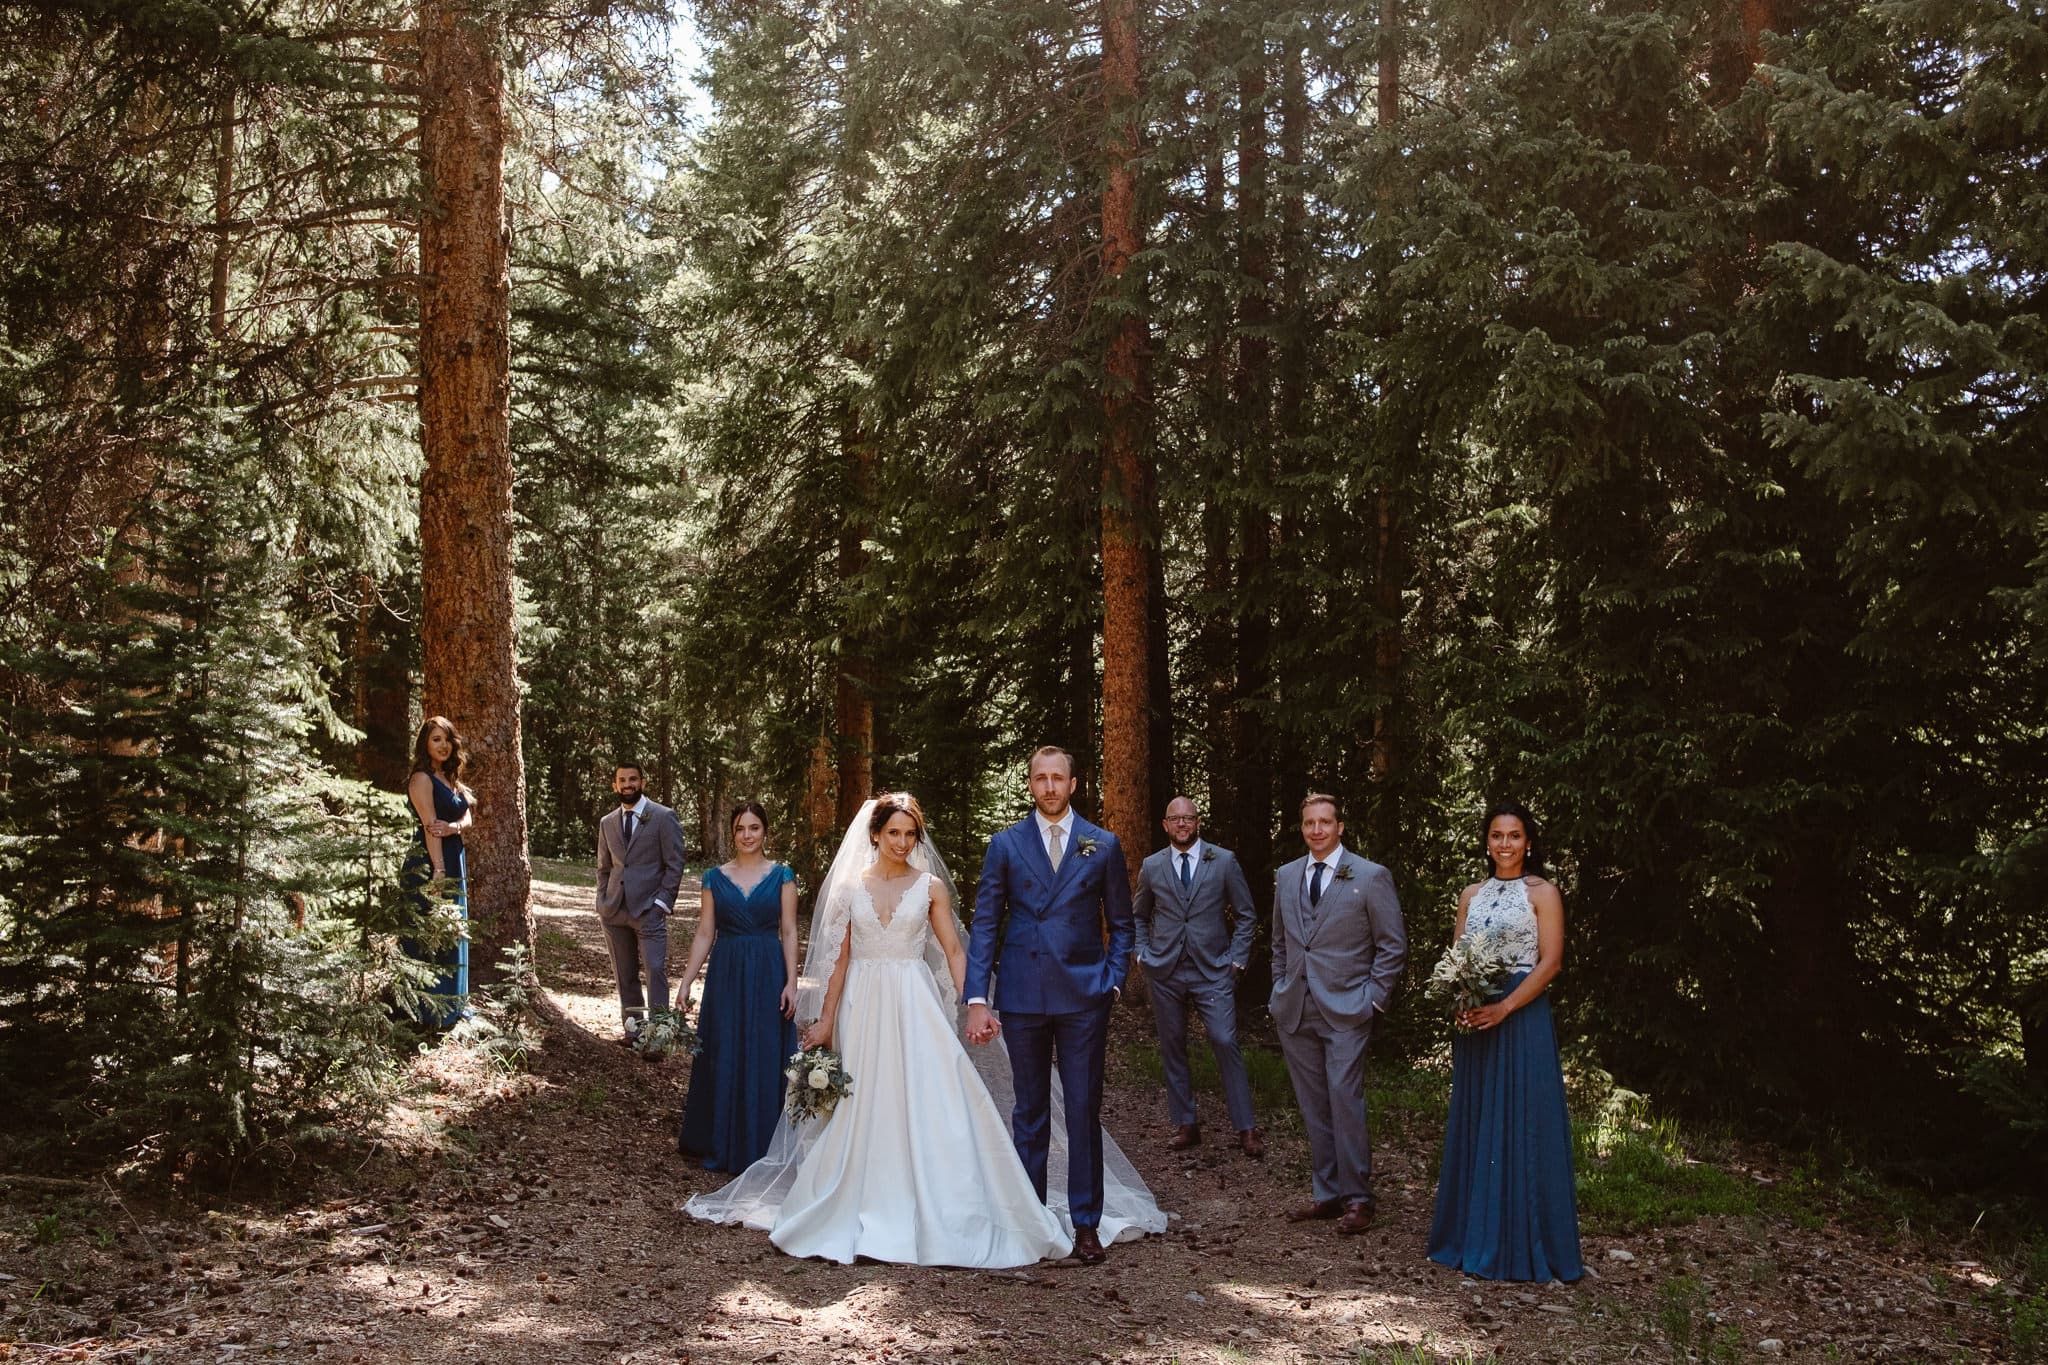 Bride and groom with their wedding party in the woods, Breckenridge Nordic Center wedding, Summit County wedding photographer 